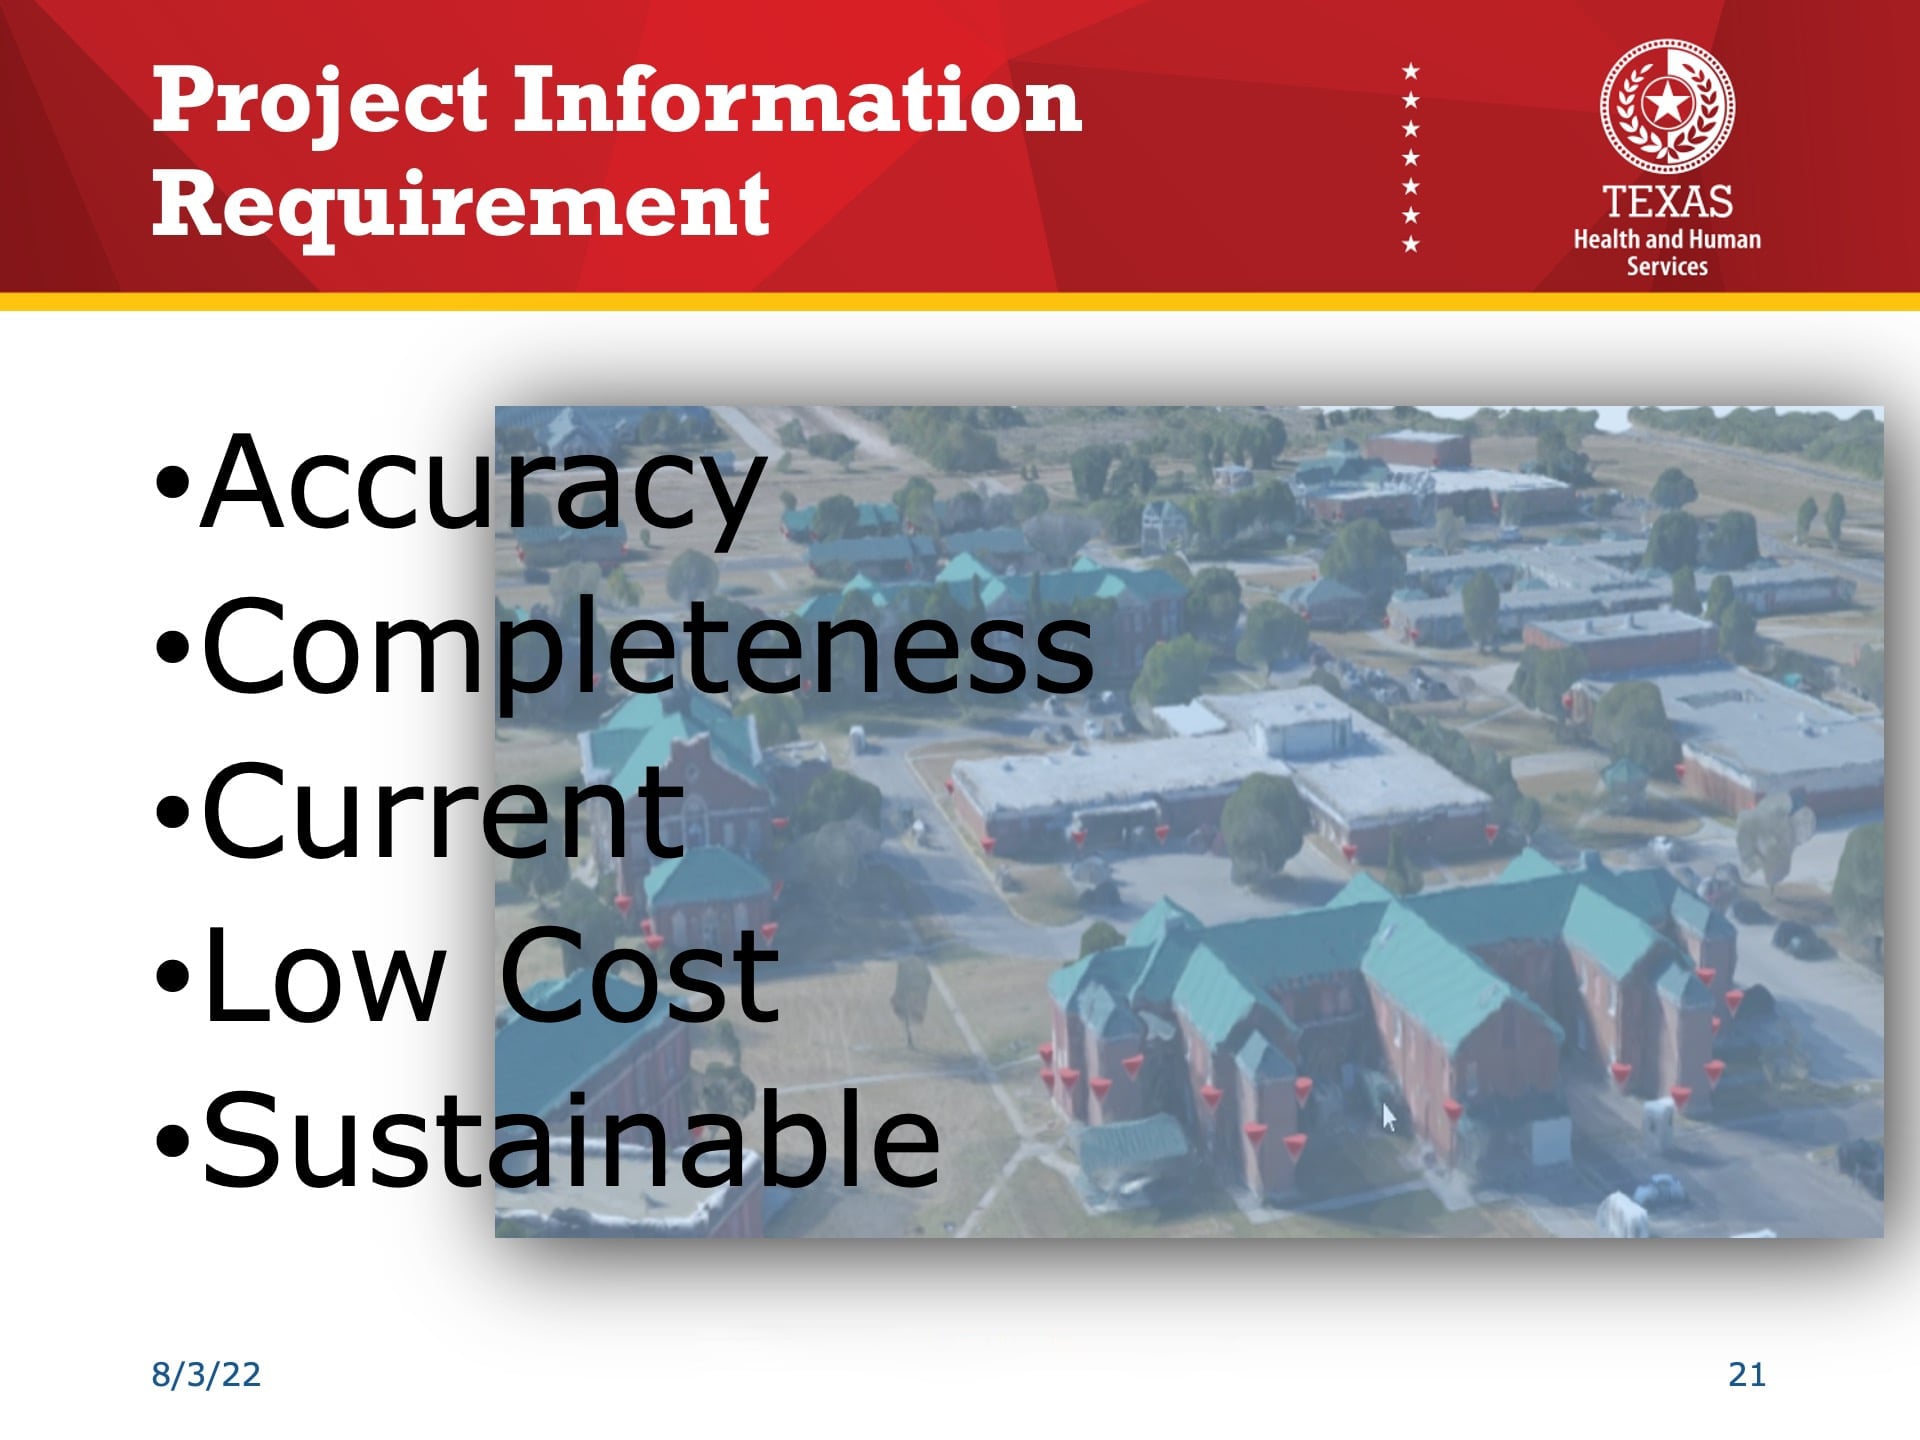 Esri UC 2022 Slide Reading: "Project Information Requirements: Accuracy, Completeness, Current, Low Cost, Sustainable." A georeferenced 3D images of a campus is shown to the right.